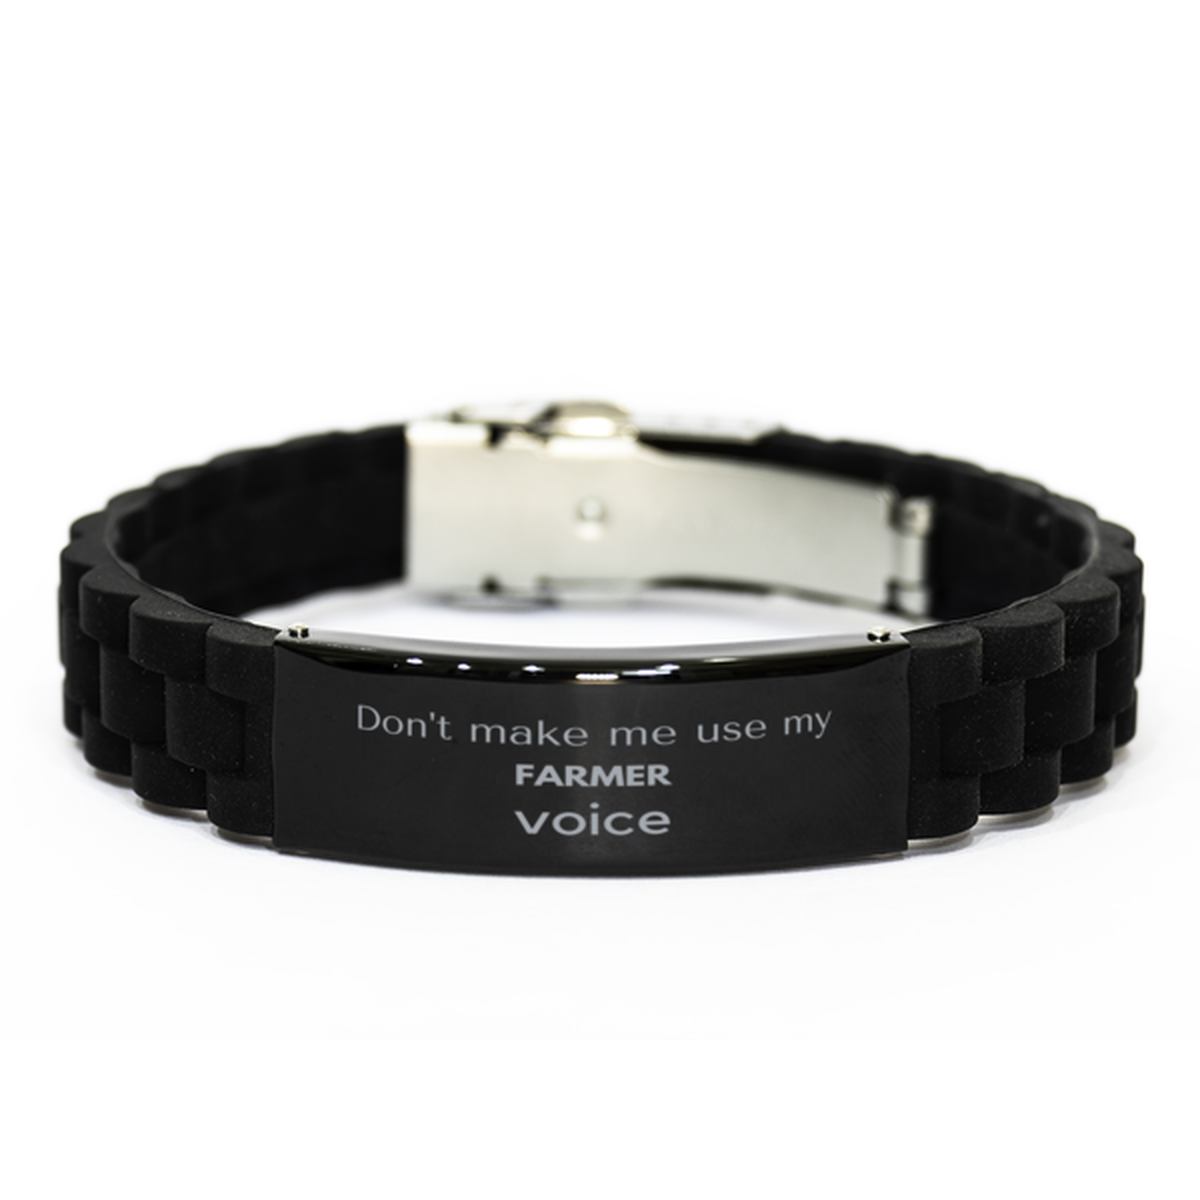 Don't make me use my Farmer voice, Sarcasm Farmer Gifts, Christmas Farmer Black Glidelock Clasp Bracelet Birthday Unique Gifts For Farmer Coworkers, Men, Women, Colleague, Friends